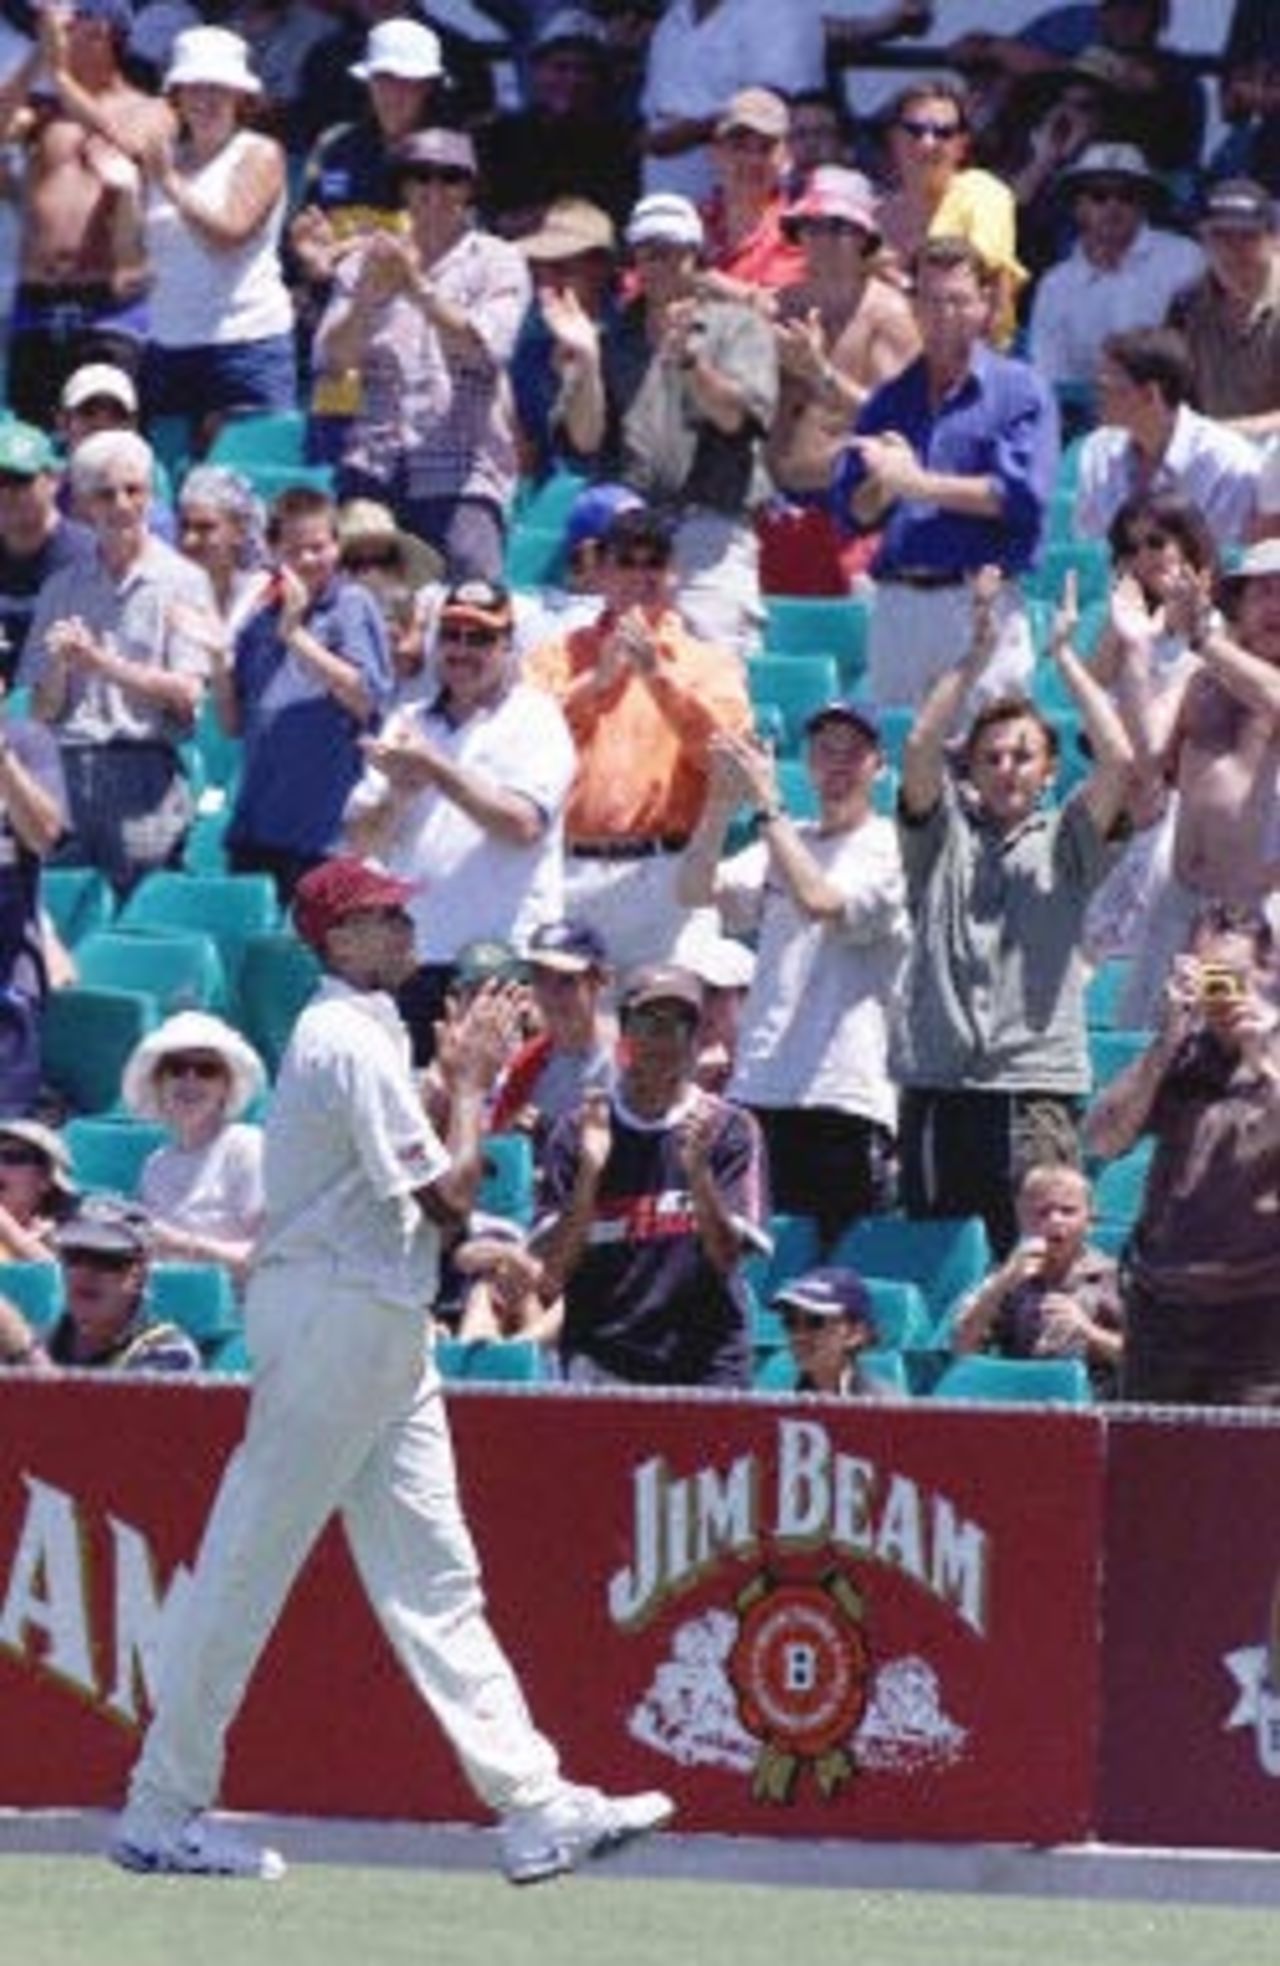 Legendary West Indian fast bowler Courtney Walsh receives a standing ovation from the crowd and returns the compliment near the end of play in the Federation Test at the Sydney Cricket Ground, 06 January 2001. The West Indies' 38-year-old world record wicket-taker was feted for playing his final Test in Australia. Victory came easy for Australia with a six-wicket victory over the West Indies in the fifth cricket Test to clinch a 5-0 series clean sweep and their 15th consecutive Test win.